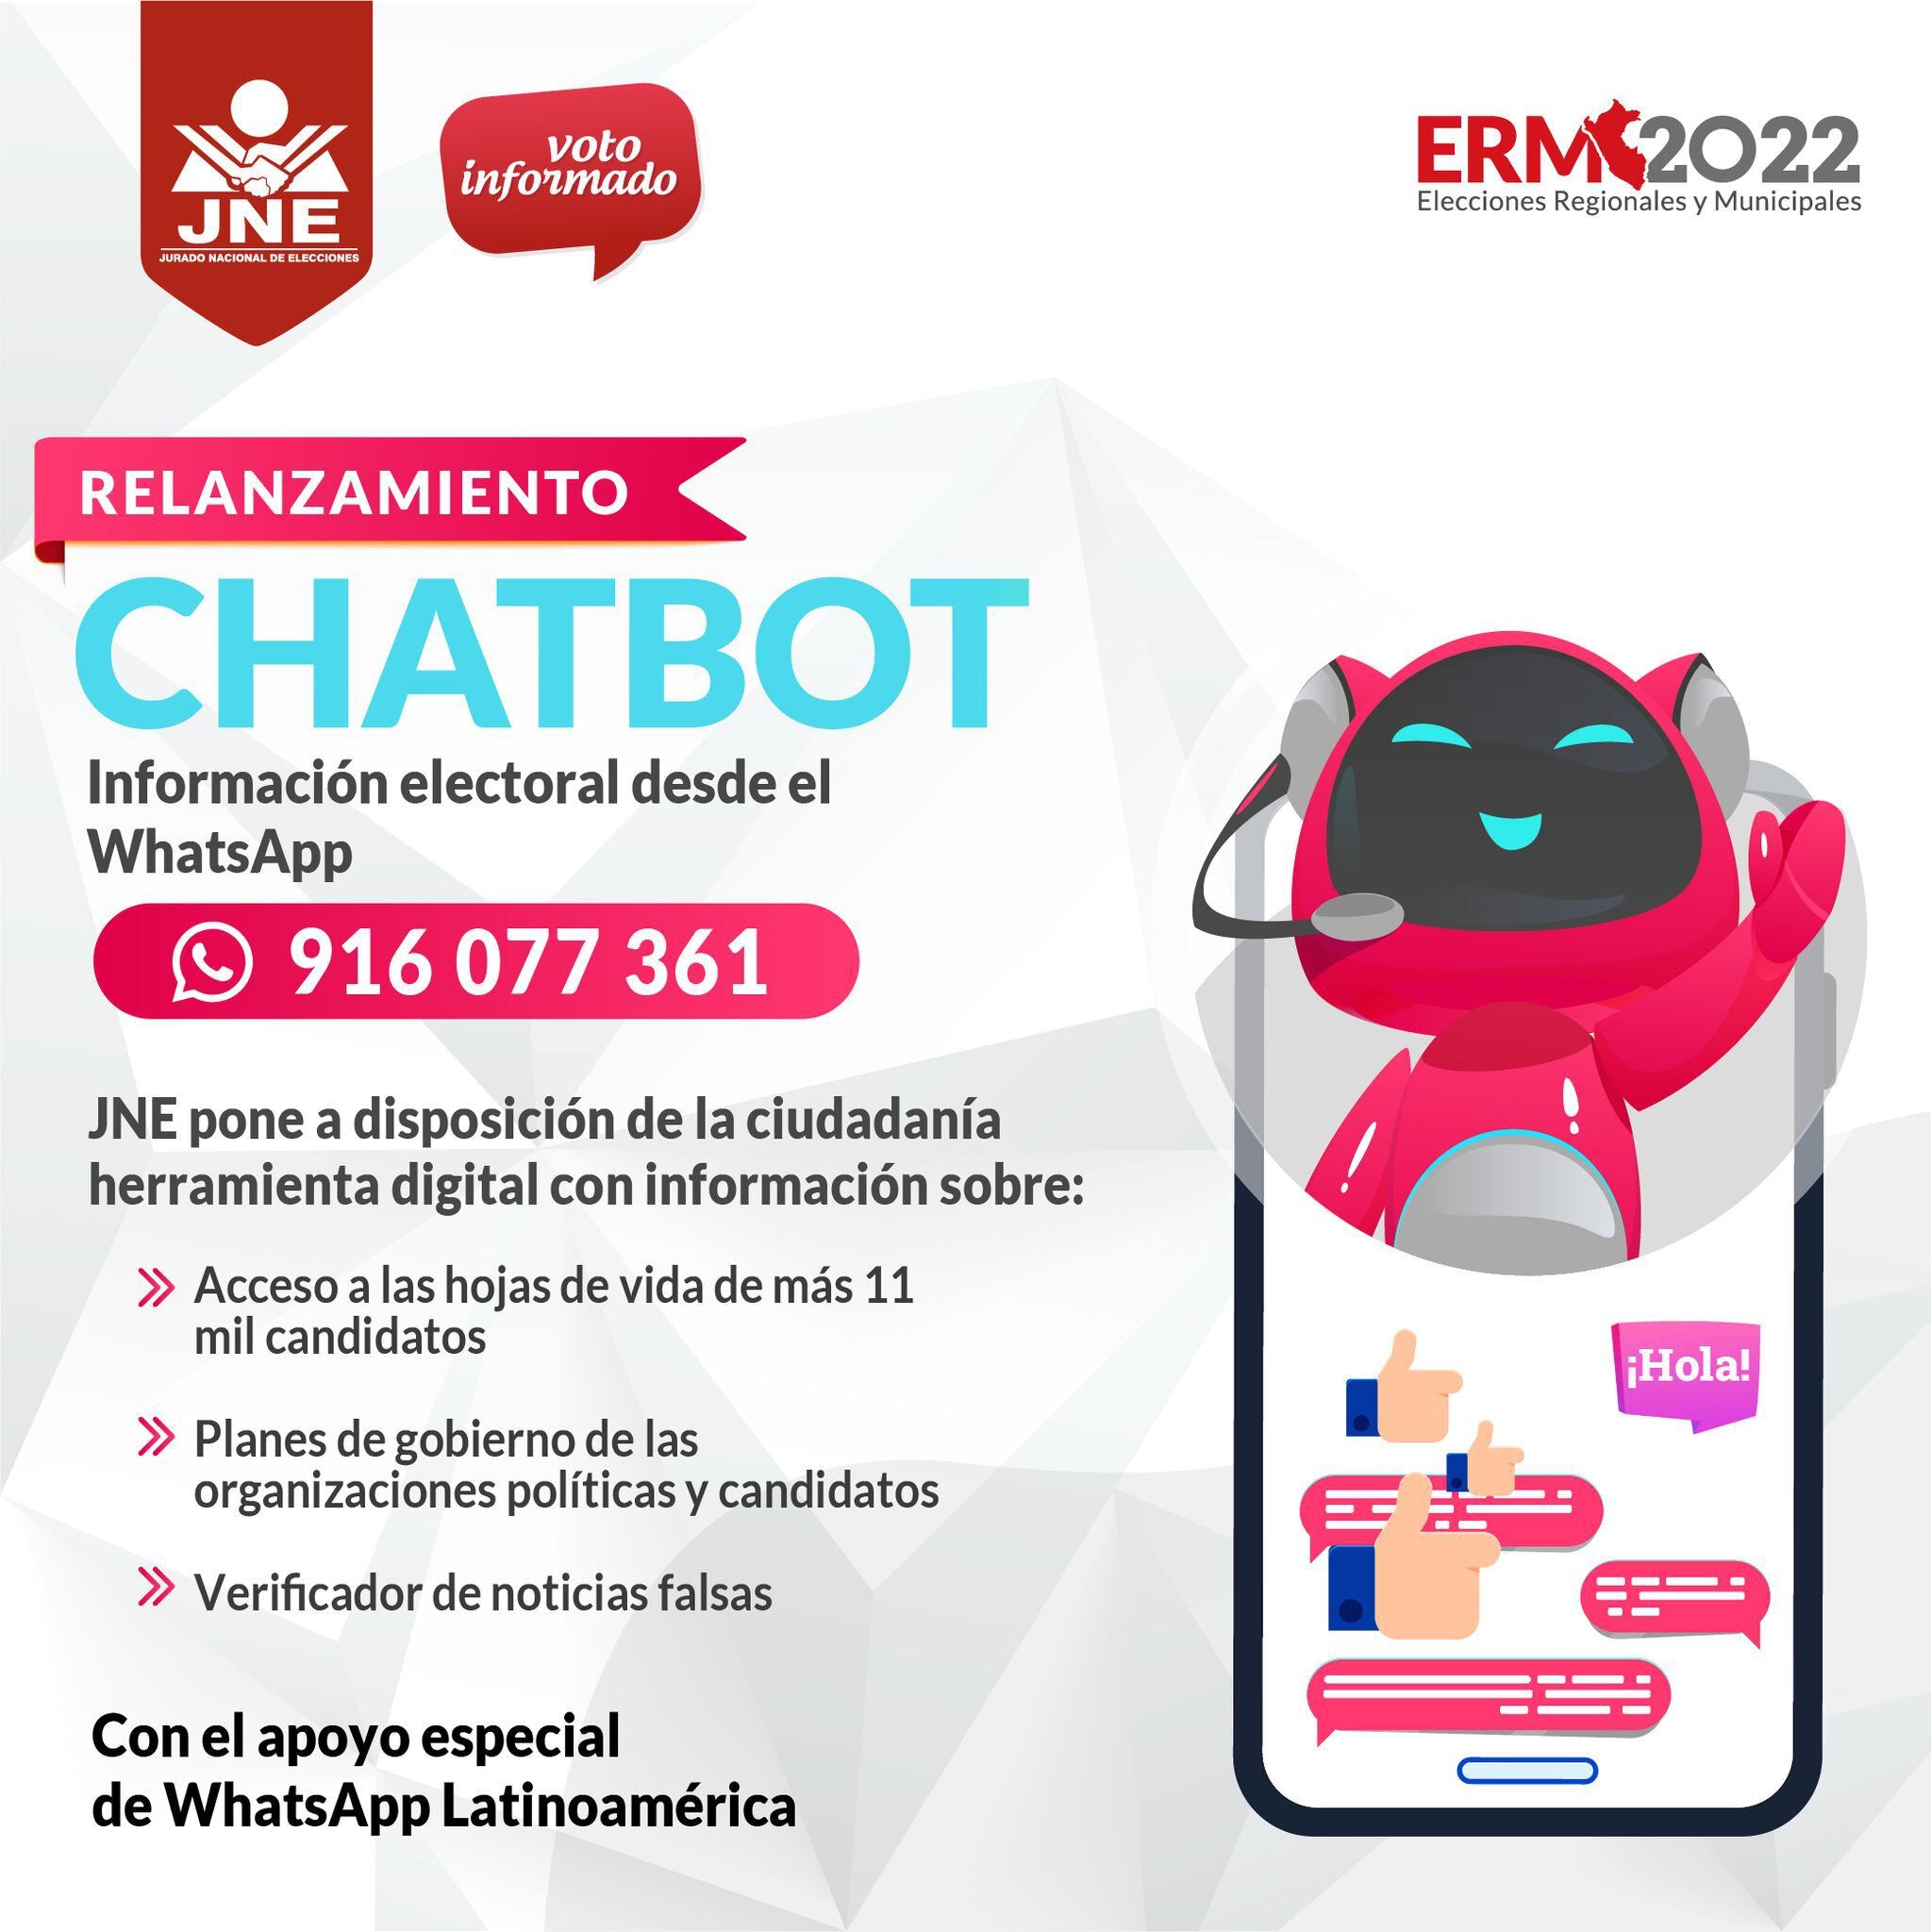 If you want to know more information about the candidates, you can use the JNE chatbot